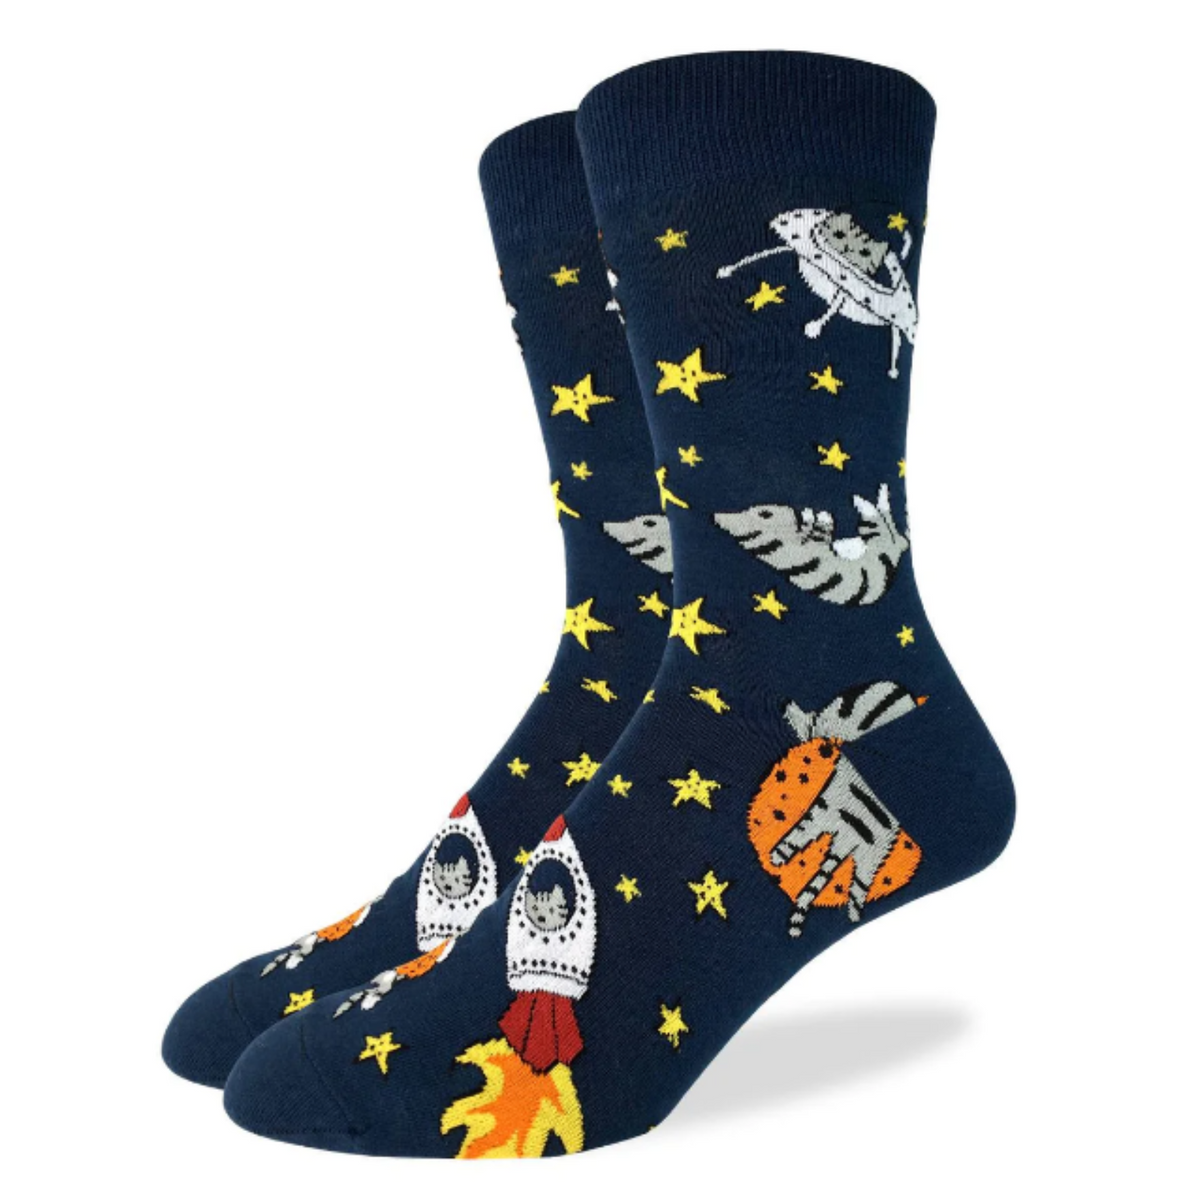 Good Luck Sock Space Cat men&#39;s crew sock featuring navy blue sock with cats and stars and rocket ships all over. Show on display feet. 